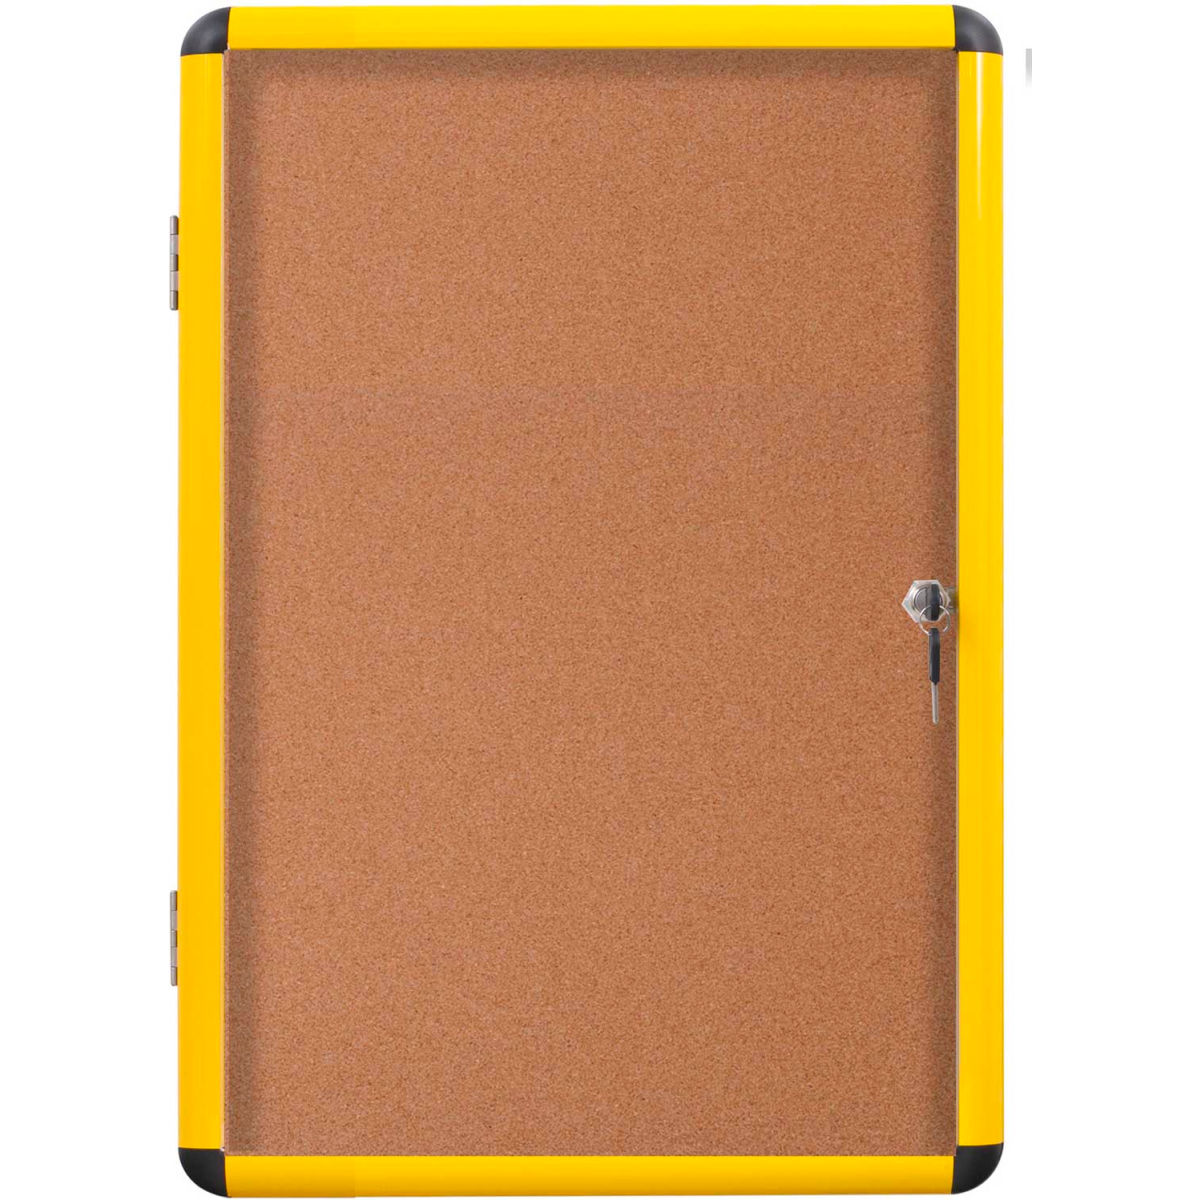 Bi-Silque Visual Communication Products  MasterVision Industrial Cork Bulletin Enclosed Board Cabinet with Yellow Aluminum Frame Door - 28 x 38.25 in -  Bi-Silque Visual Communication Products Inc, B2213661